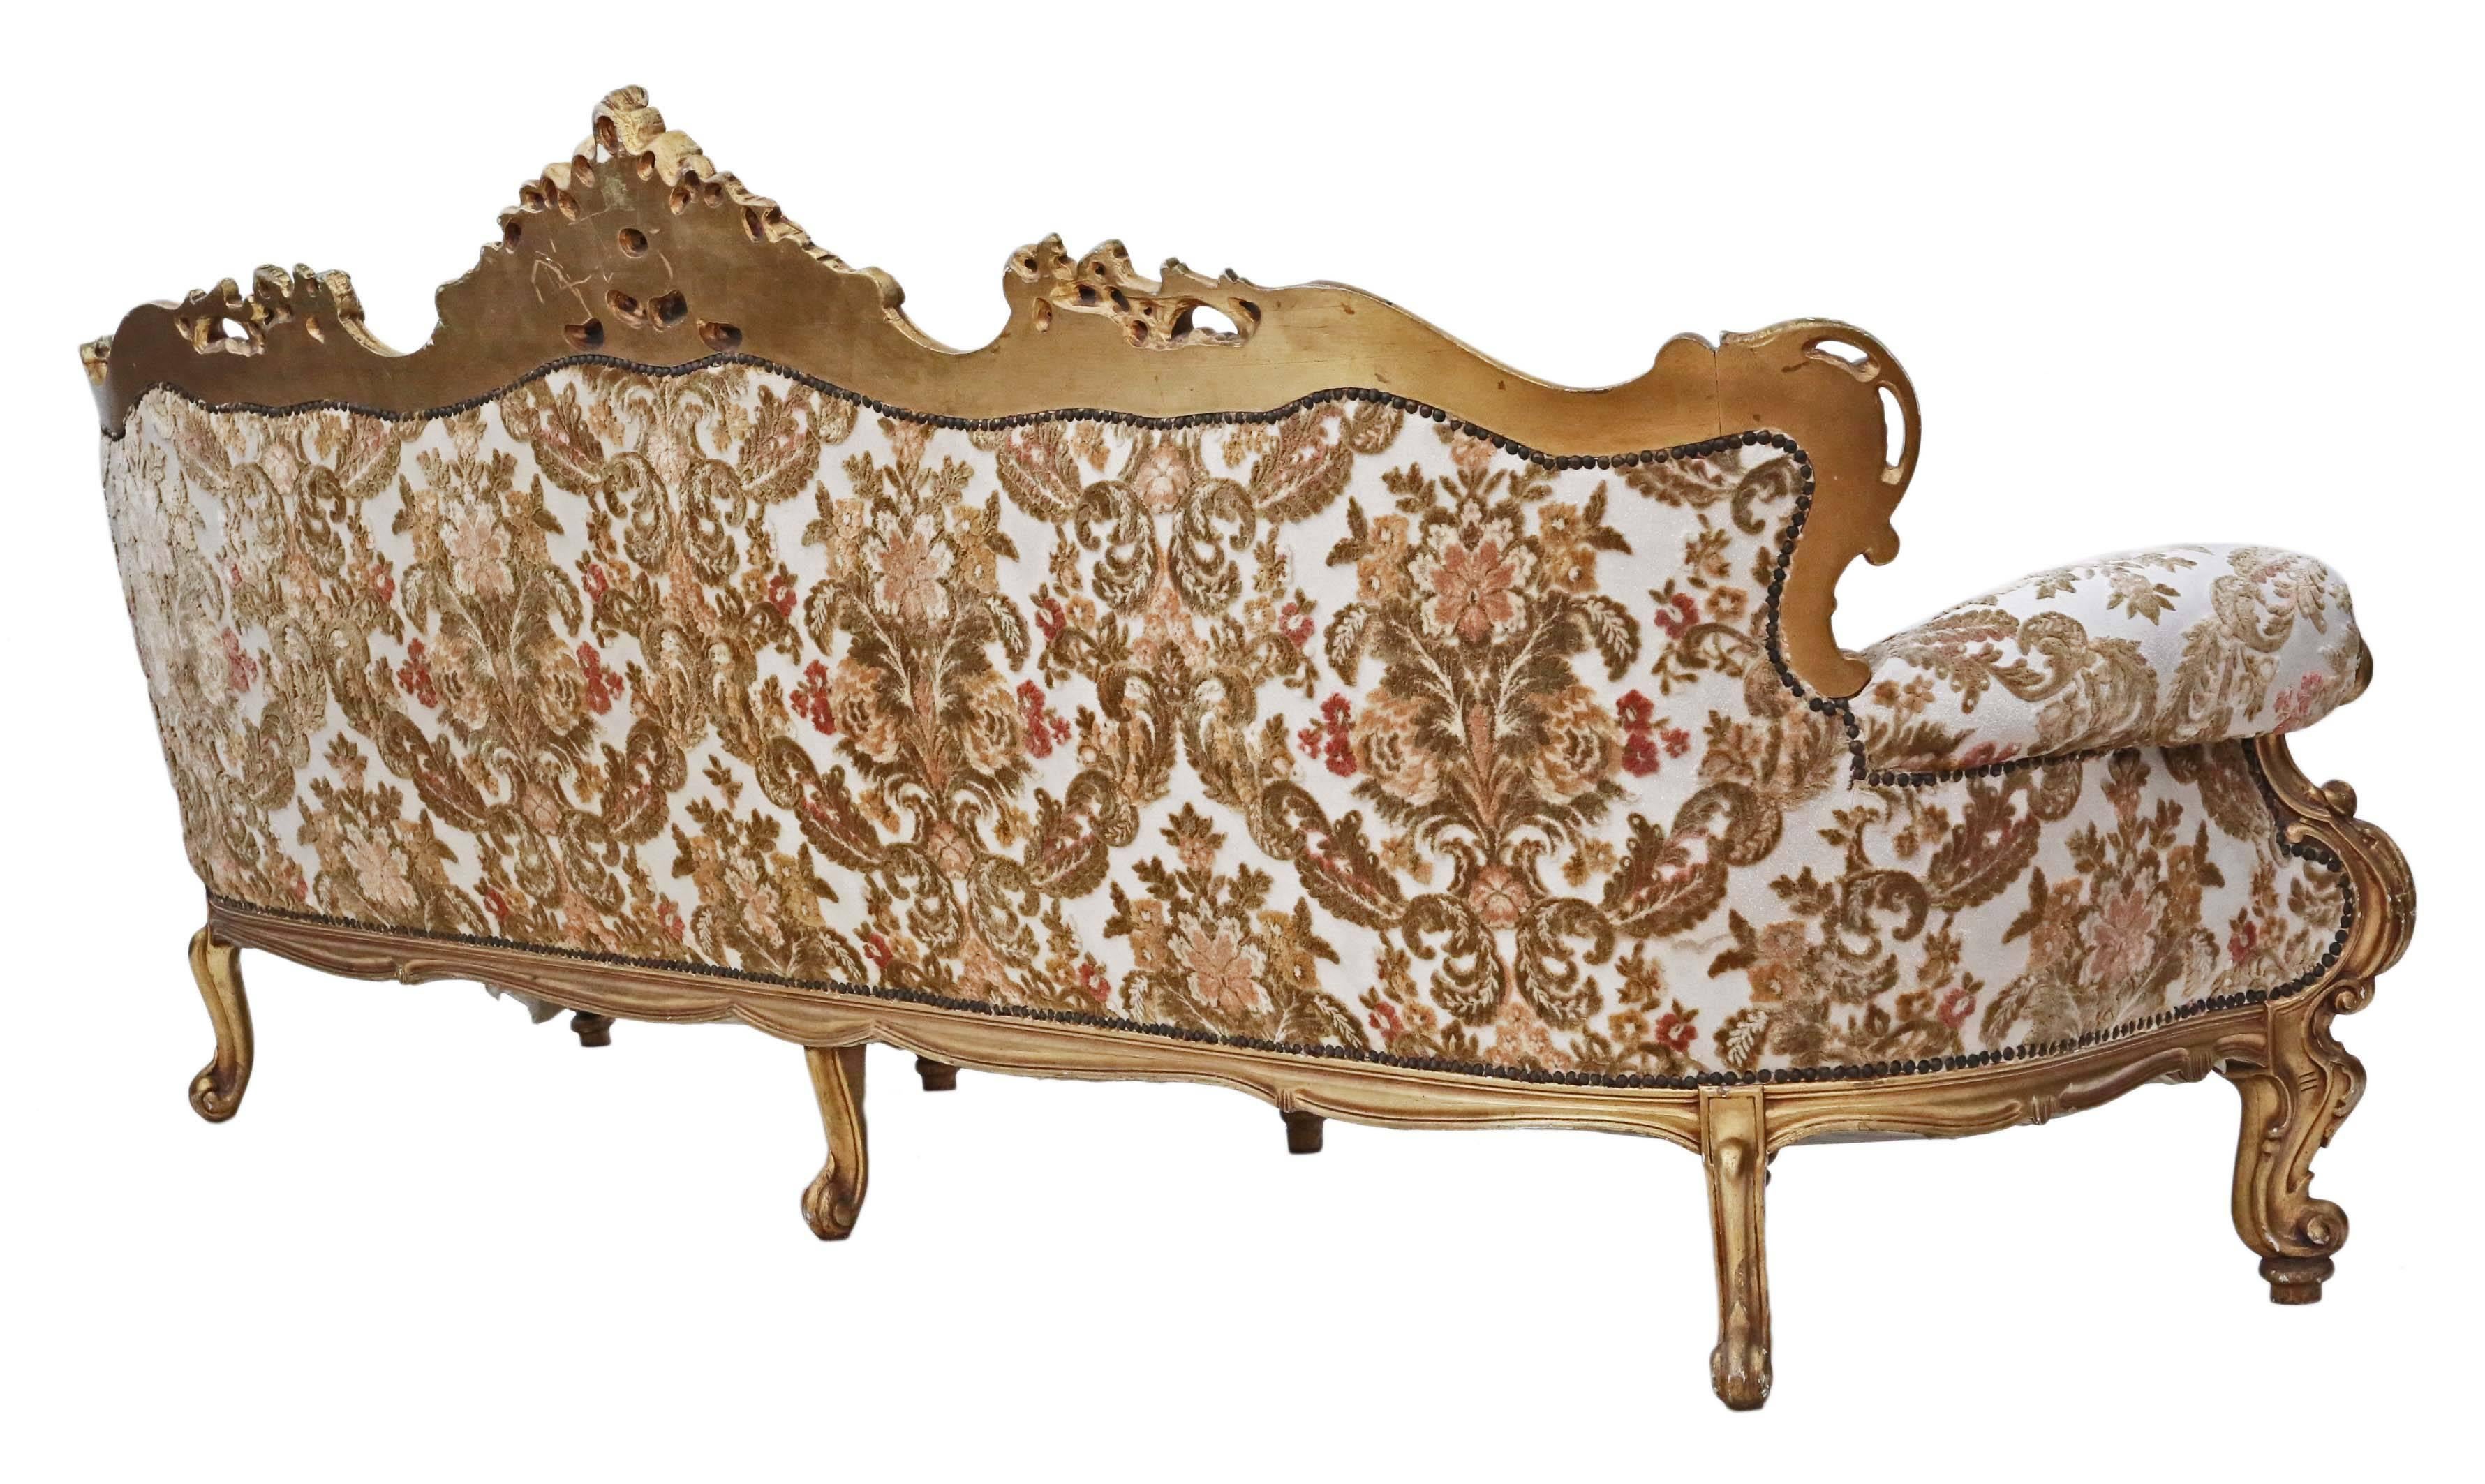 Antique Large Quality French Giltwood Sofa Settee Chaise Longue For Sale 4